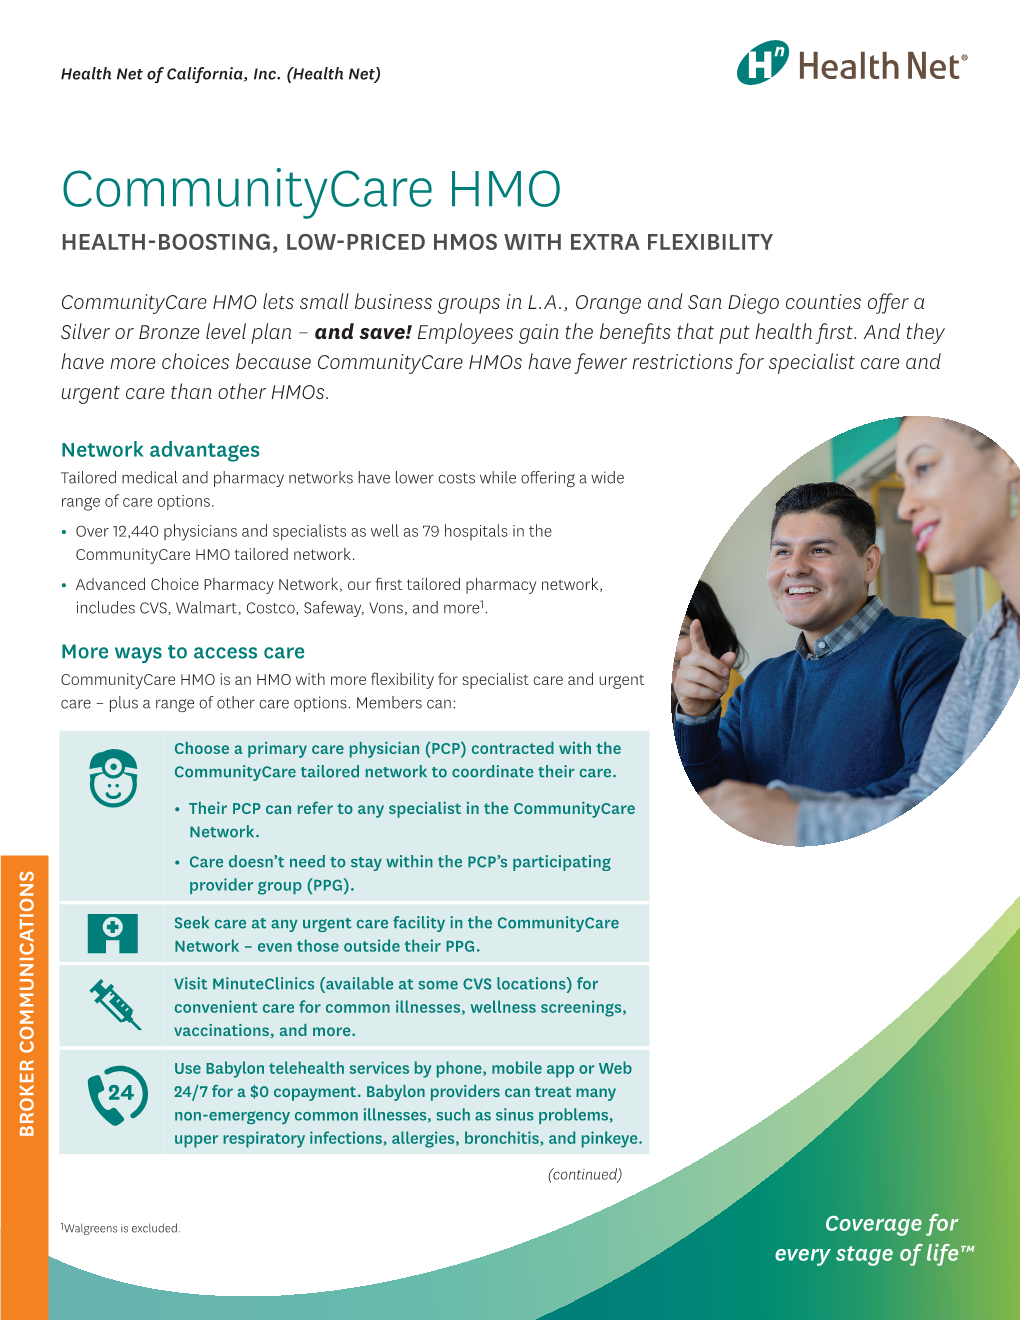 Communitycare HMO HEALTH-BOOSTING, LOW-PRICED HMOS with EXTRA FLEXIBILITY